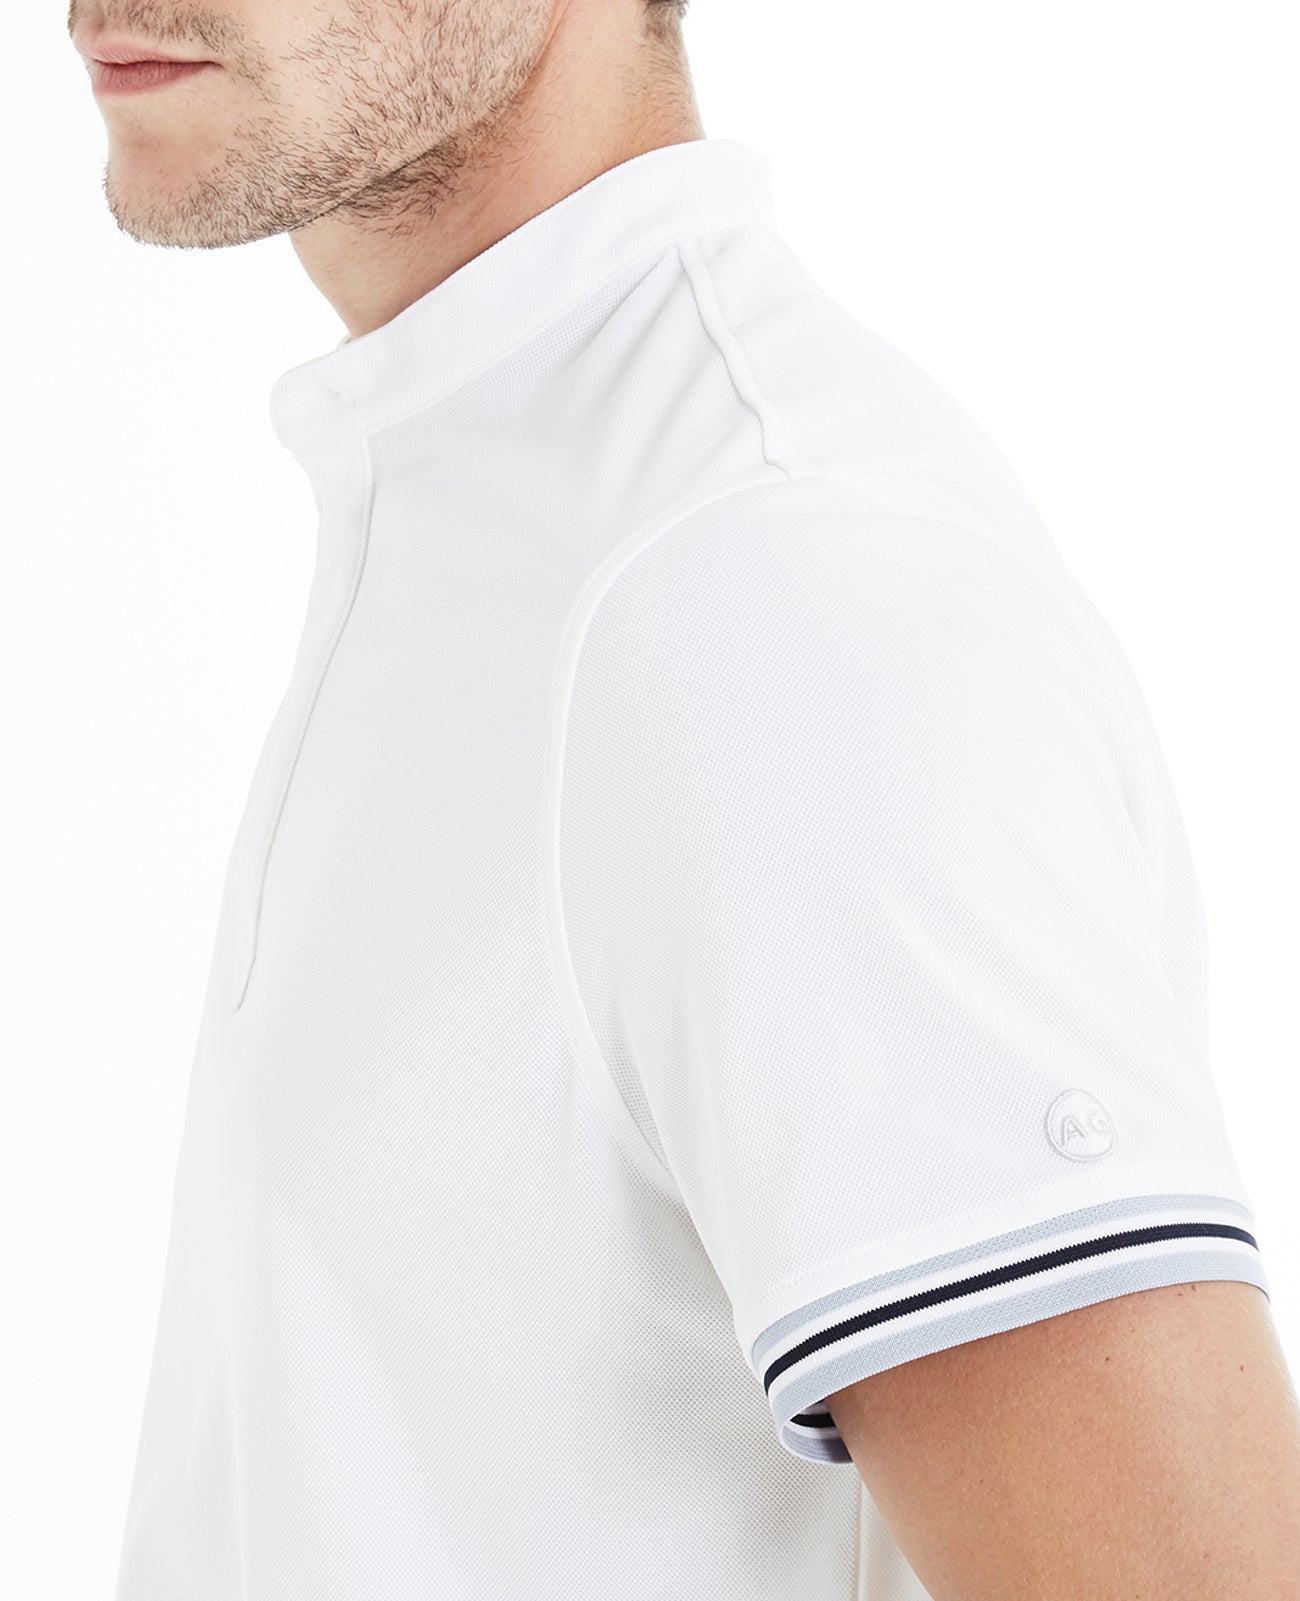 Haskett Polo Bright White Green Label Collection Men Tops Photo 4